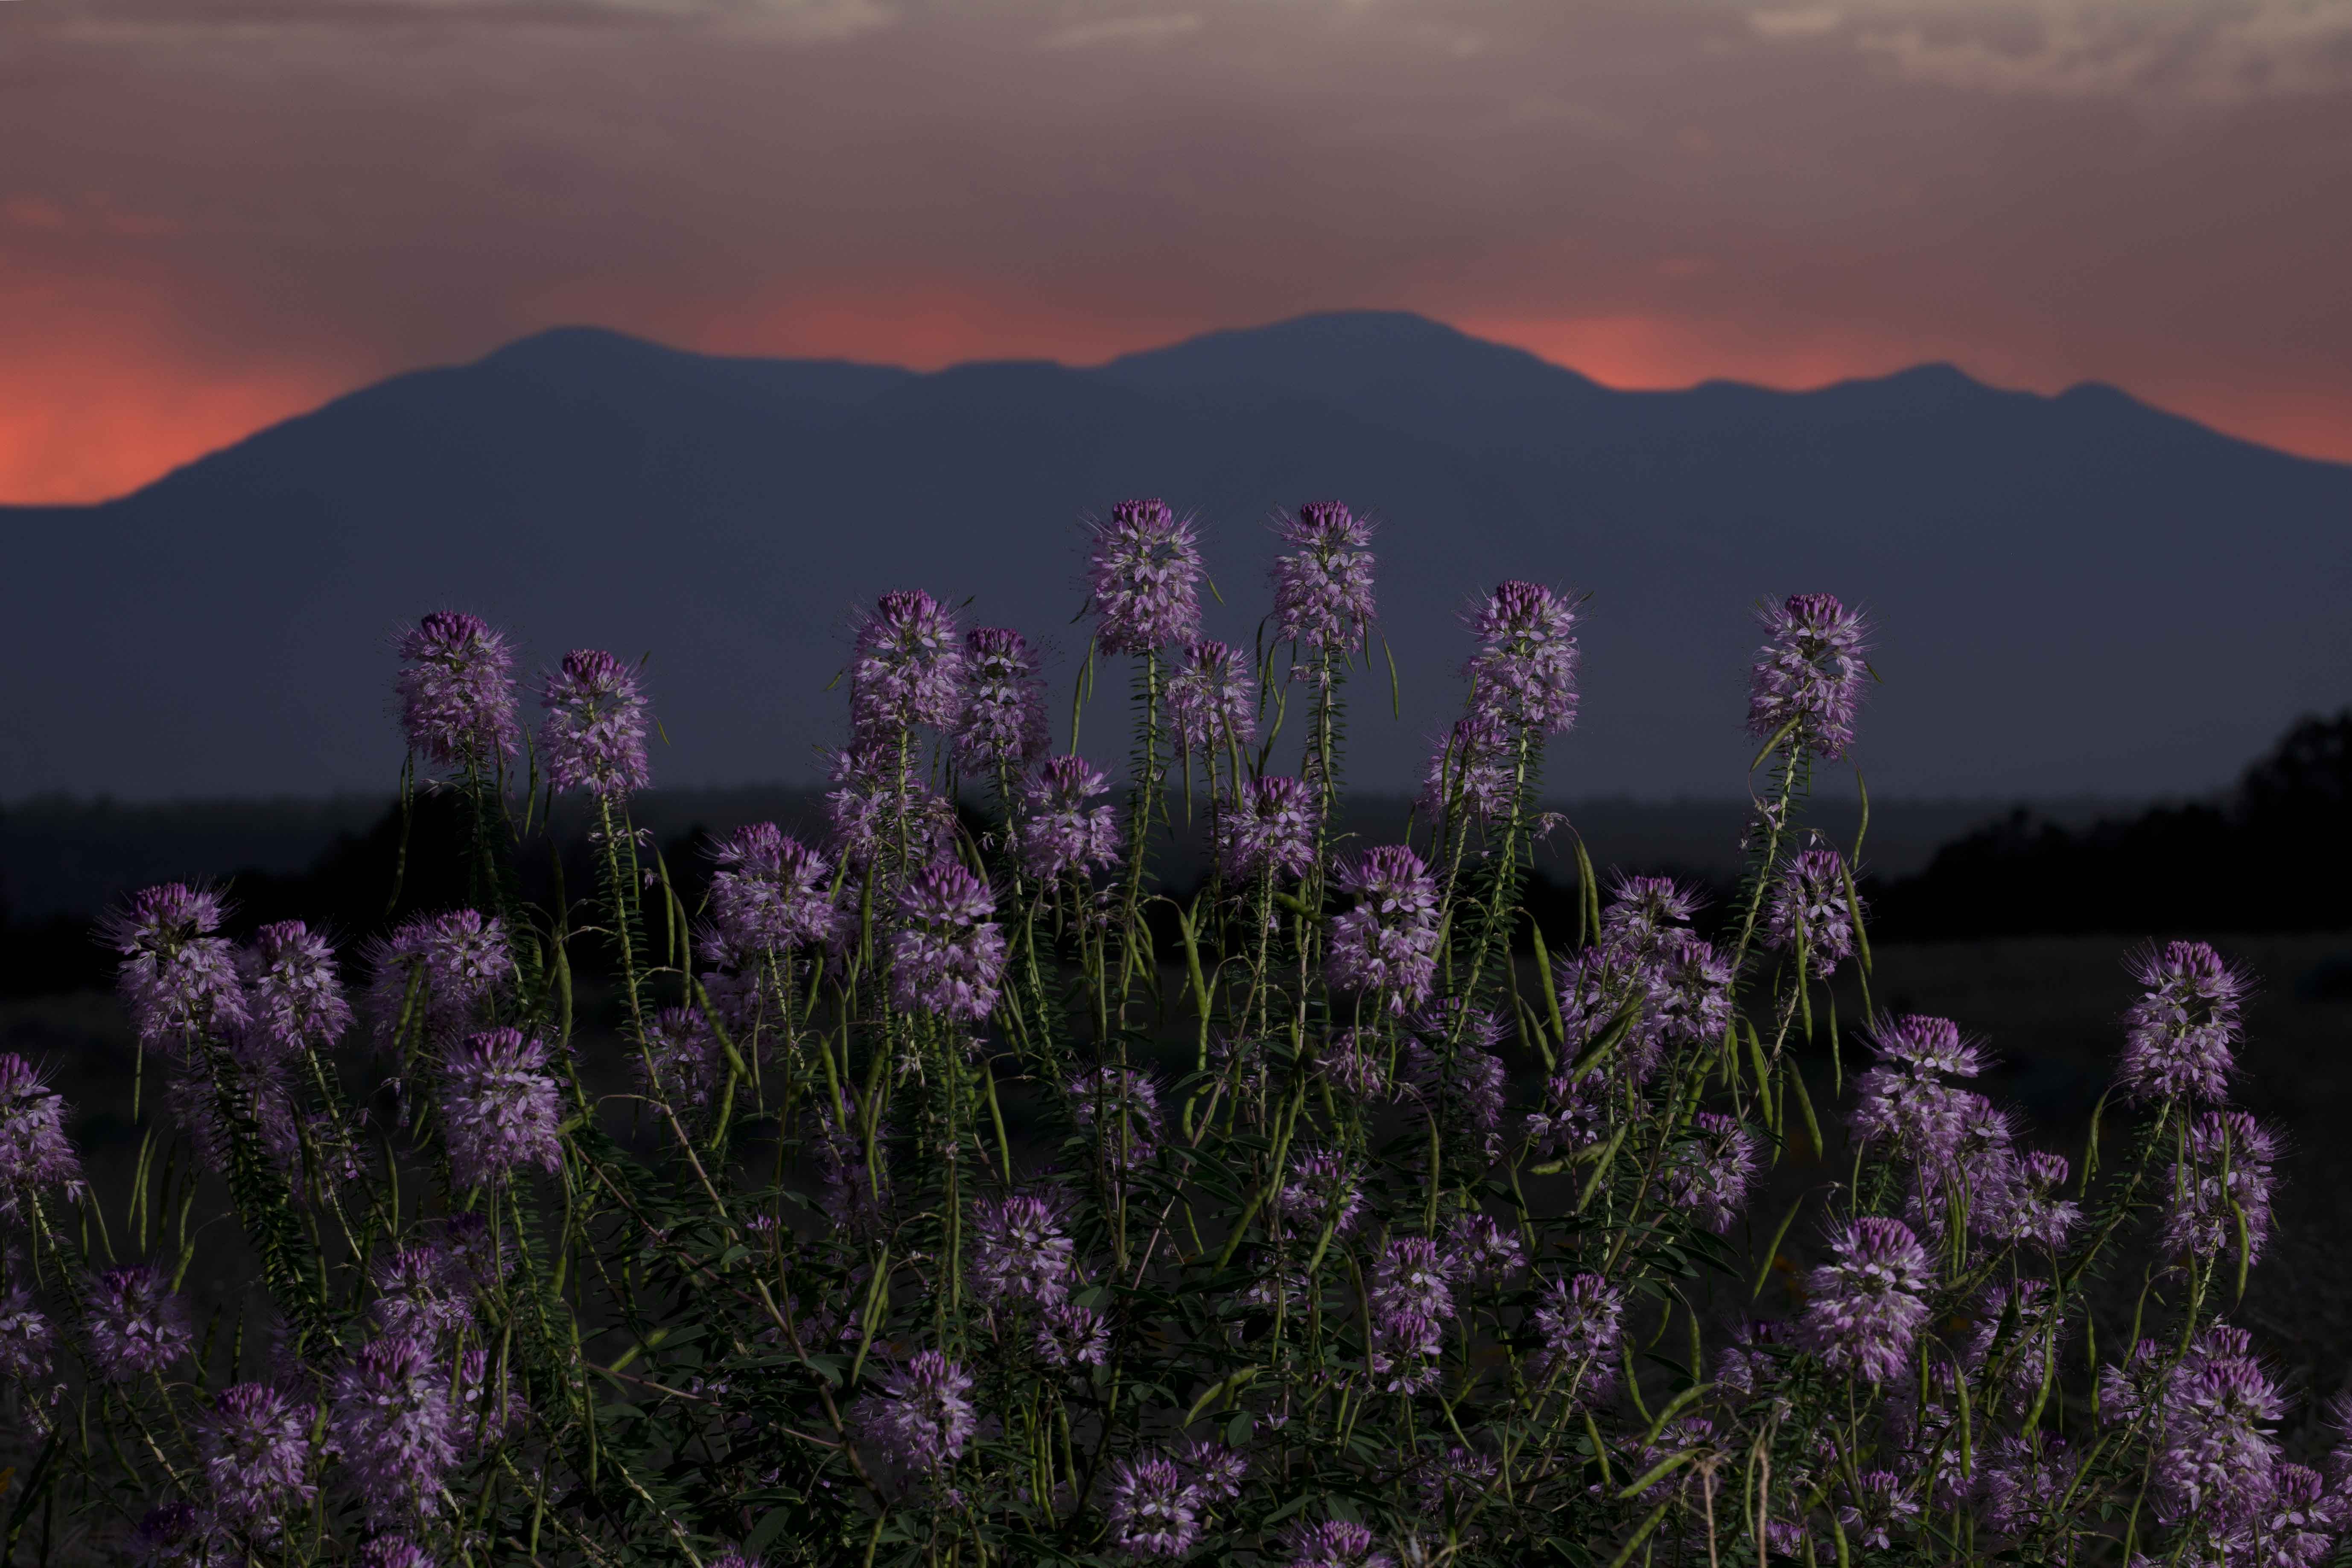 Rocky Mt. Bee Plants in northern Arizona's Cinder Basin with the San Francisco Peaks in the distance (late twilight with flash).